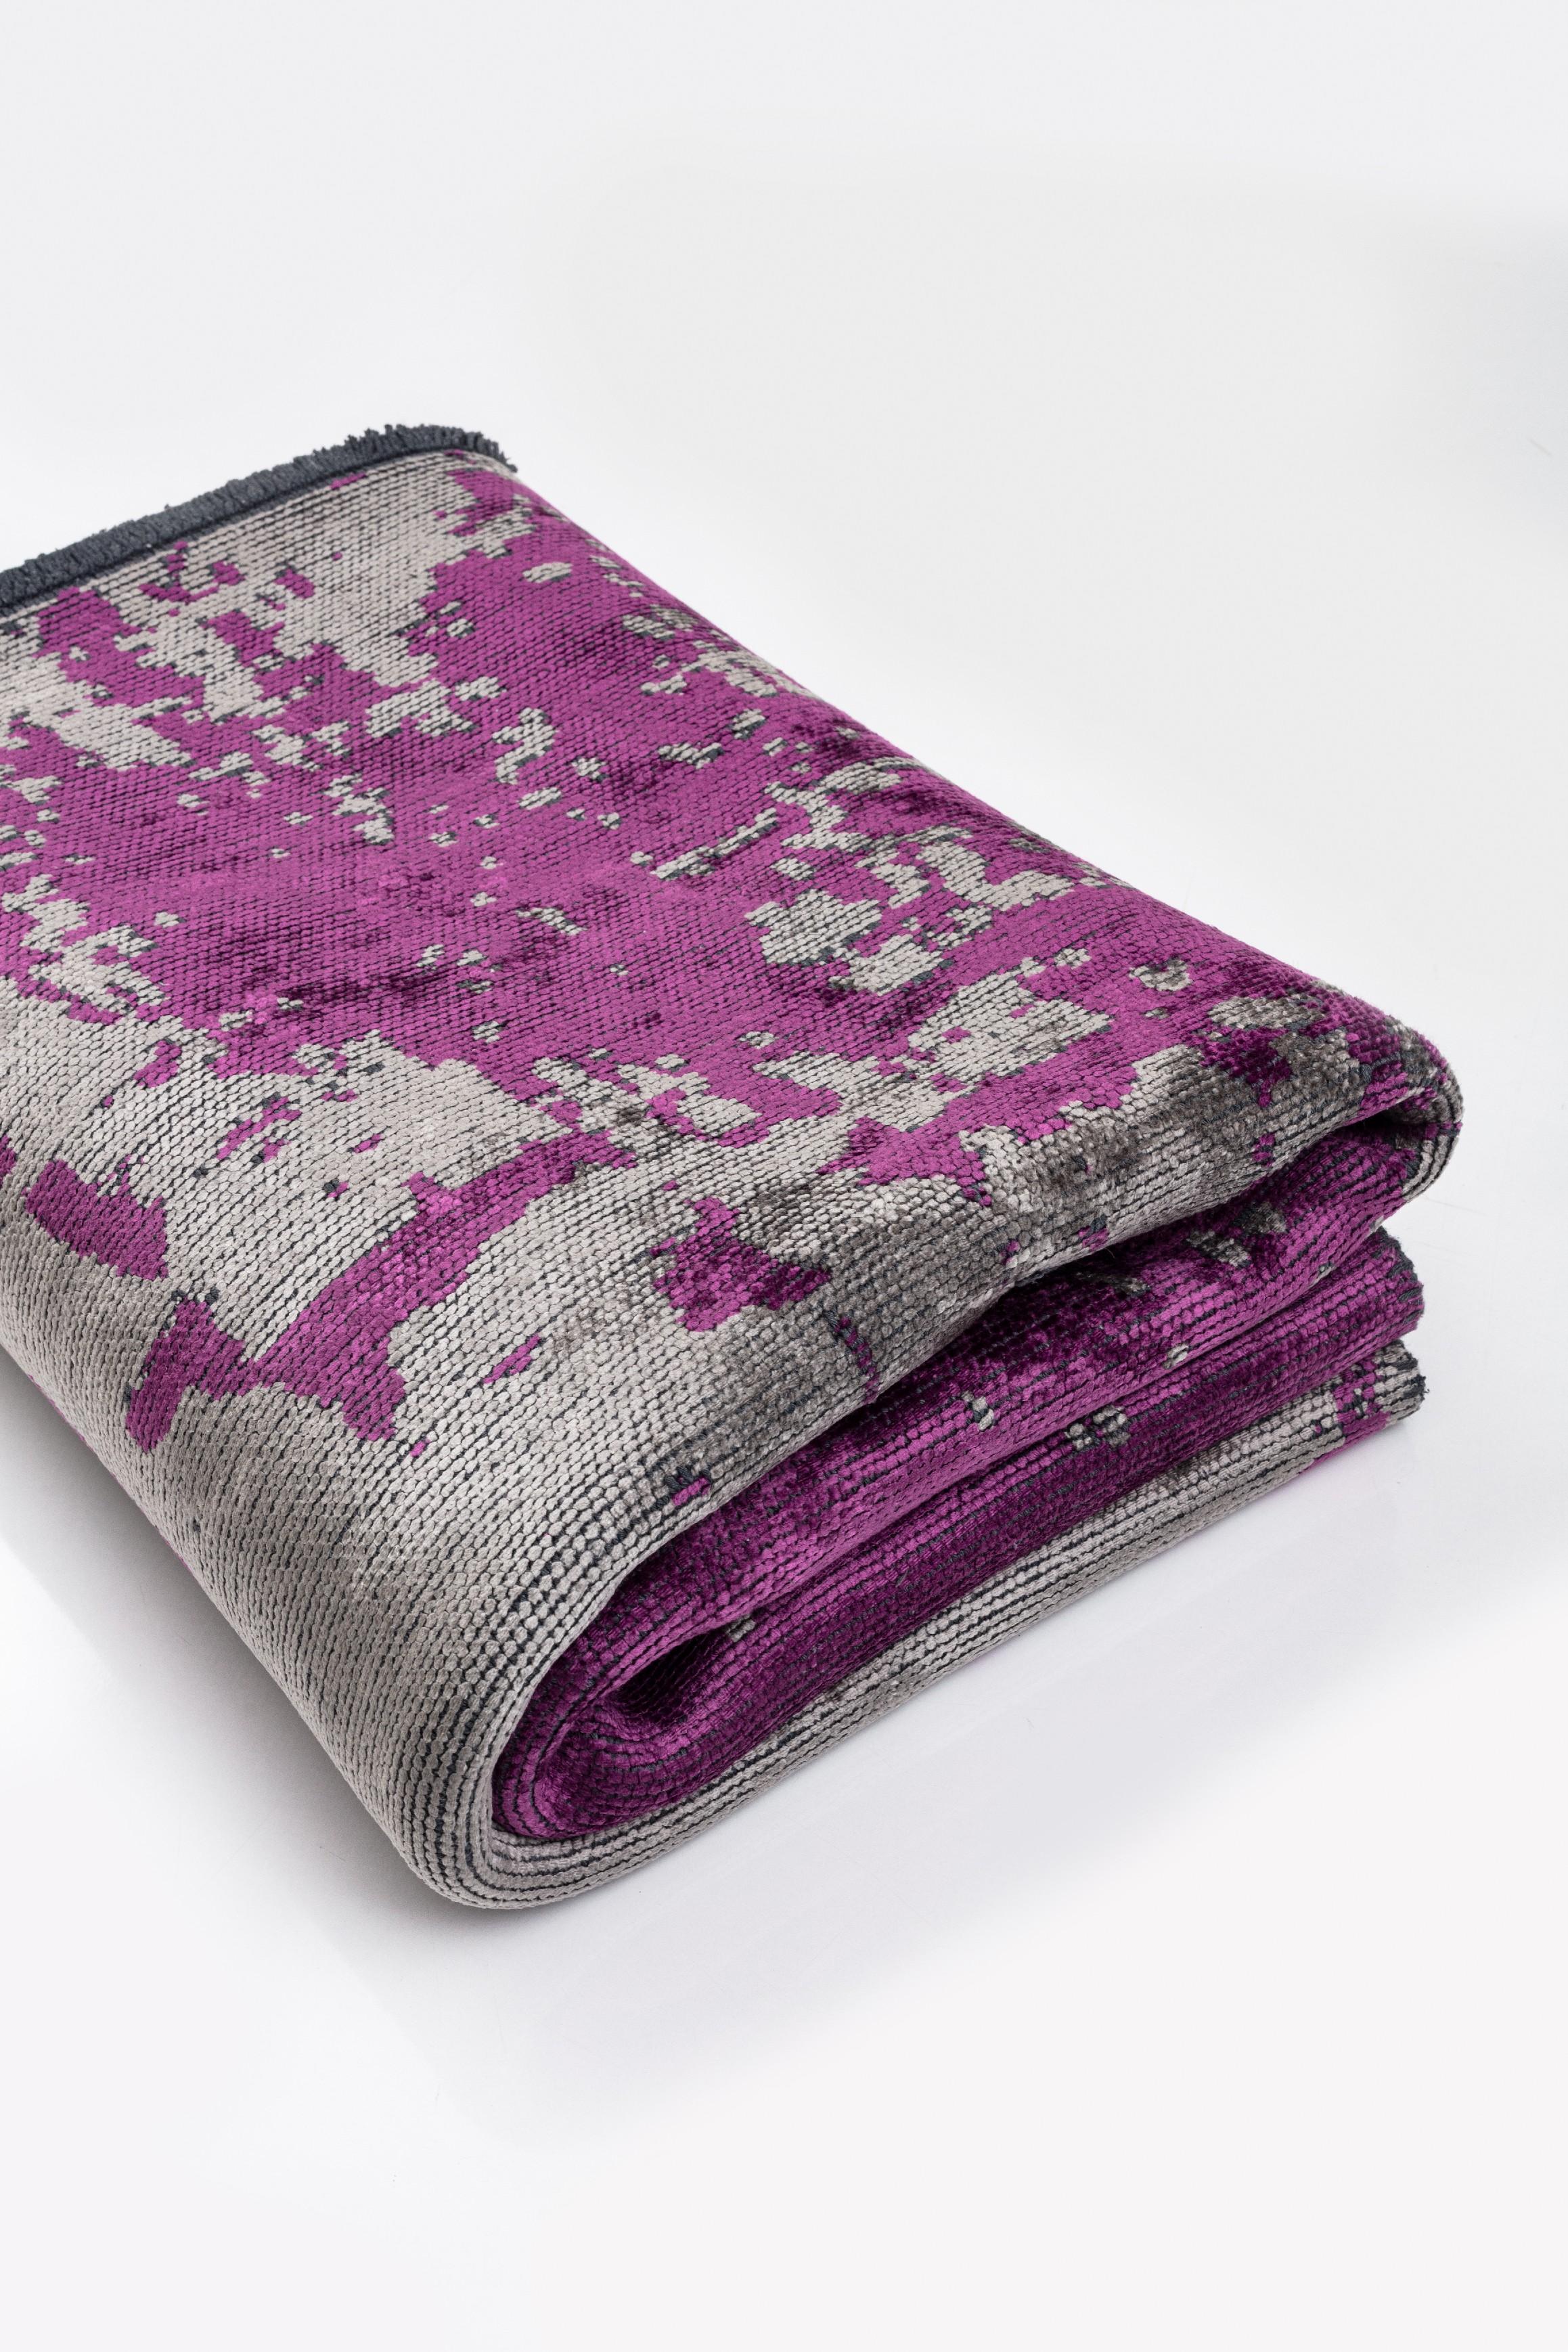 For Sale:  (Purple) Modern Abstract Luxury Area Rug 4